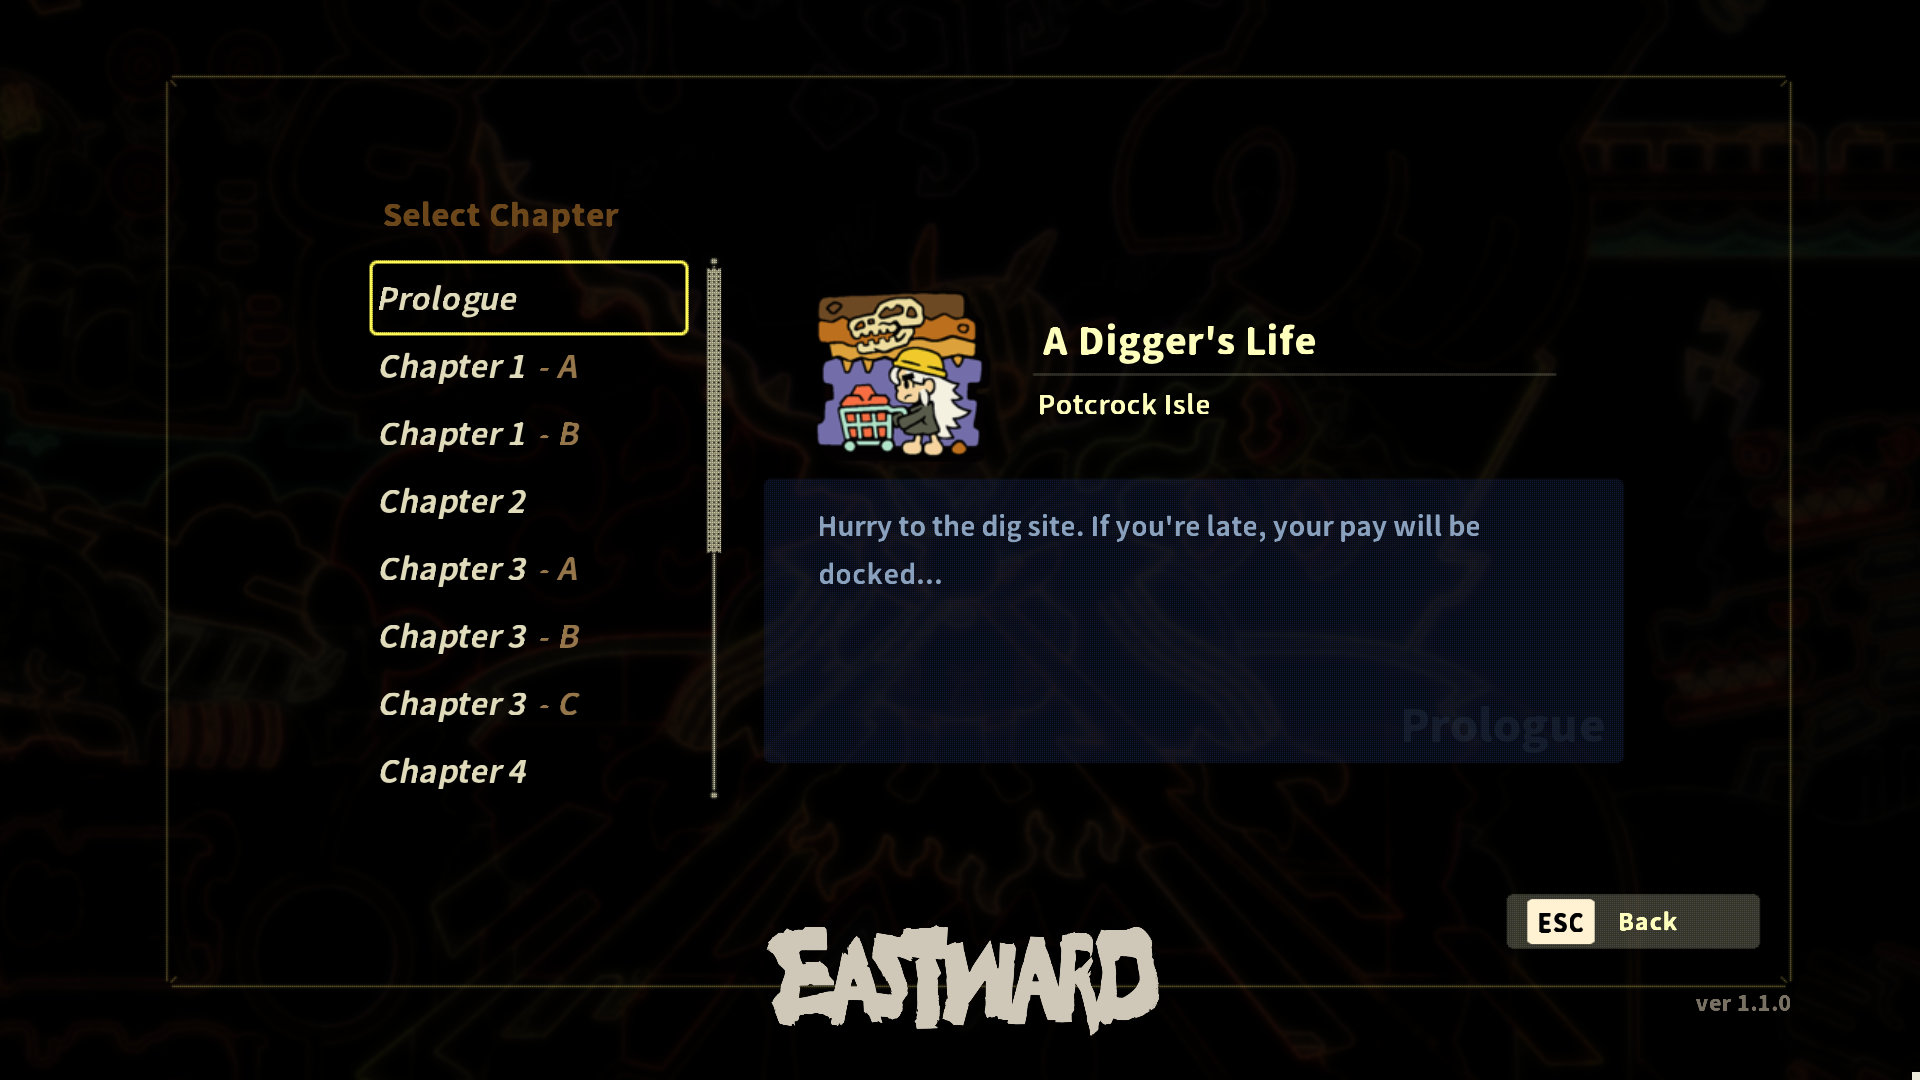 Eastward Update 1.1.0 Patch Notes (Chapter Selecting & Fast Travel) – Oct 26, 2021